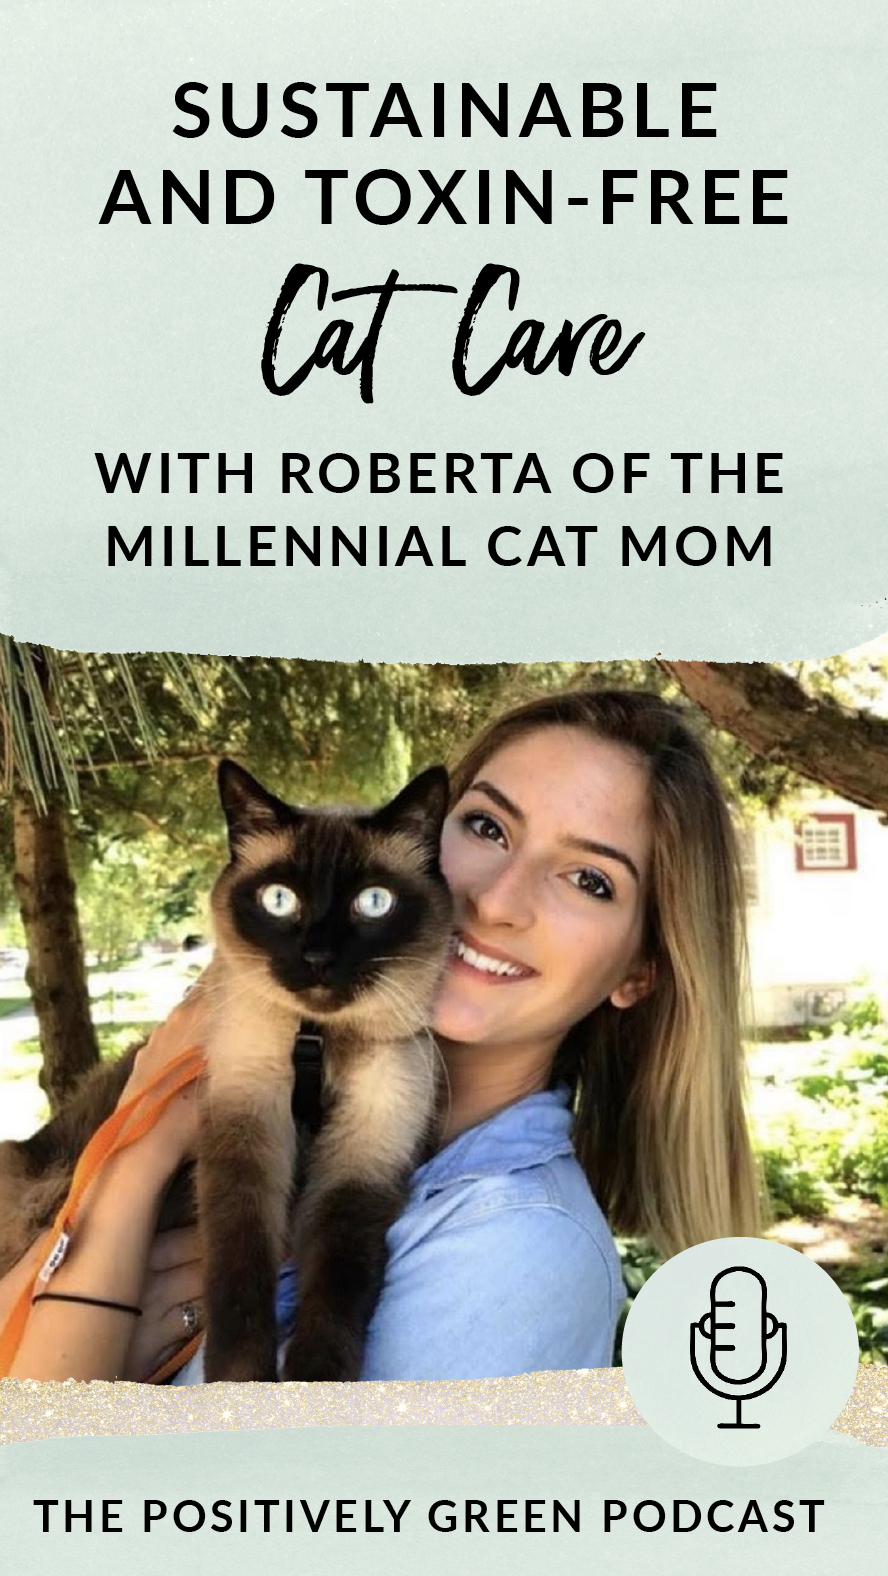 Sustainable and toxin free cat care with Roberta Donaldson of The Millennial Cat Mom